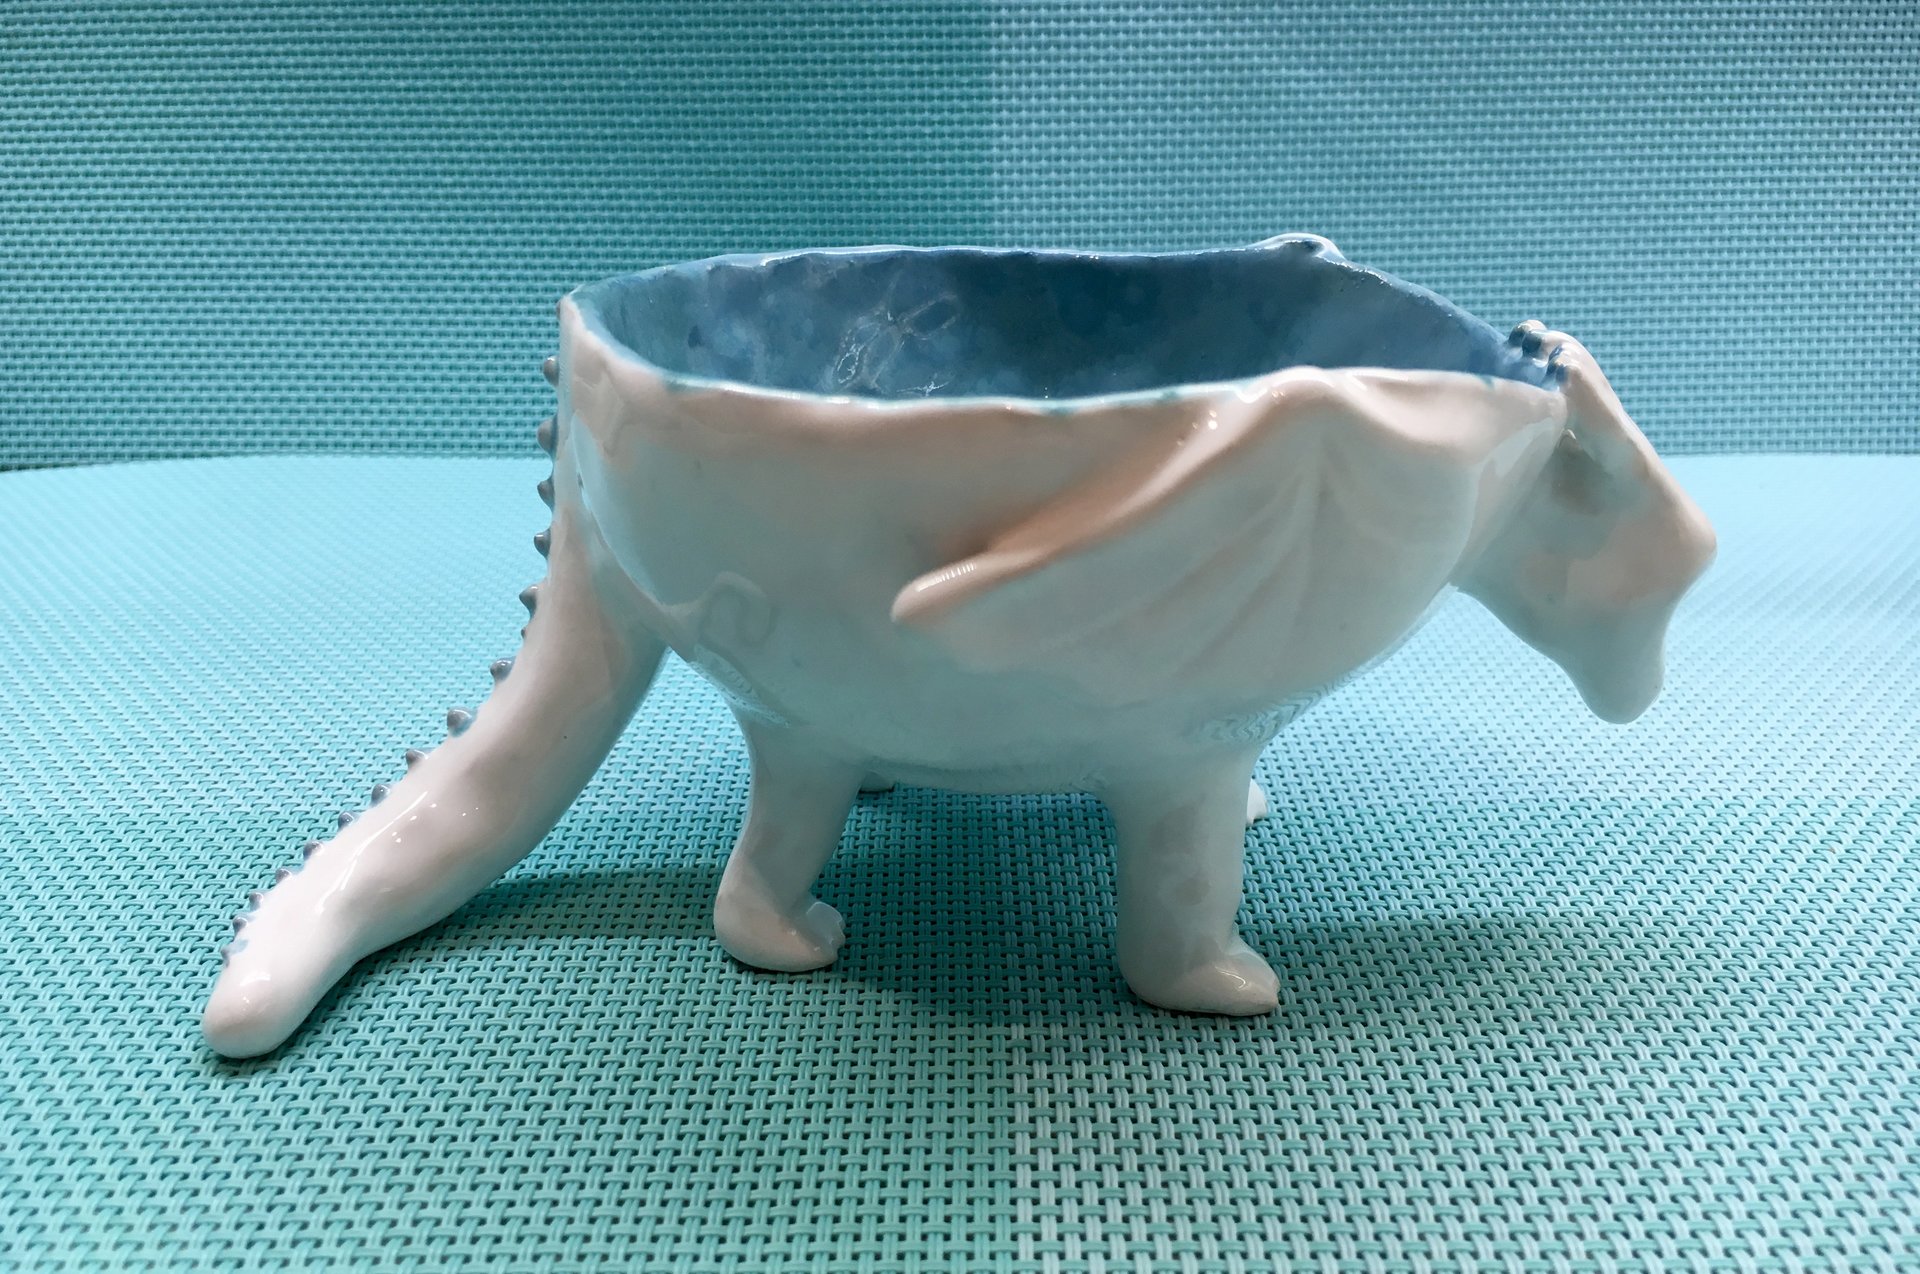 White Dragon - Pialy and sauceboats, diameter - 11 cm, height - 8 cm, photo 1 of 4.